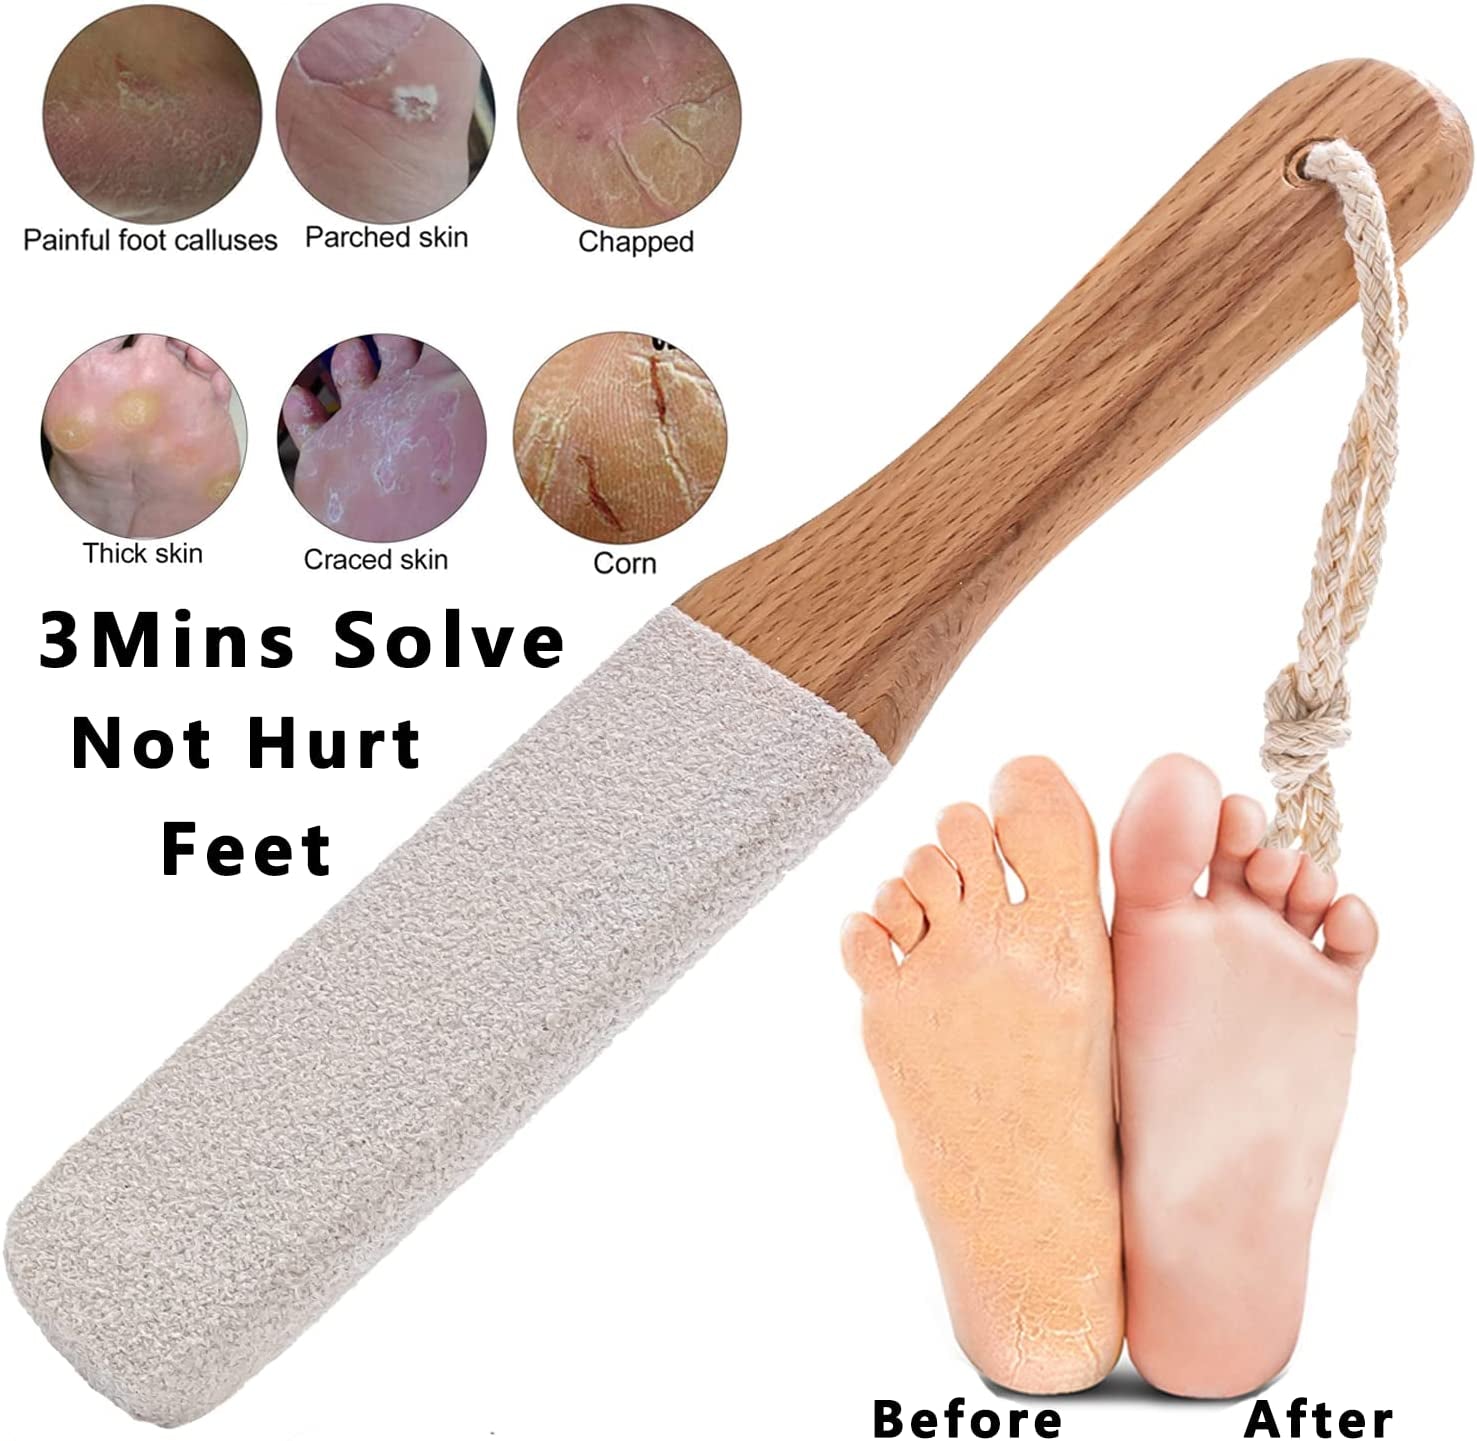 Callus Remover Foot Scrubber Colossal Foot File Foot Care and Foot Exfoliator Foot Rasp Pedicure Tools Pumice Stone for Feet,Remove Corn Hard Skin Dead Skin for Use in Shower Foot Scraper Kit